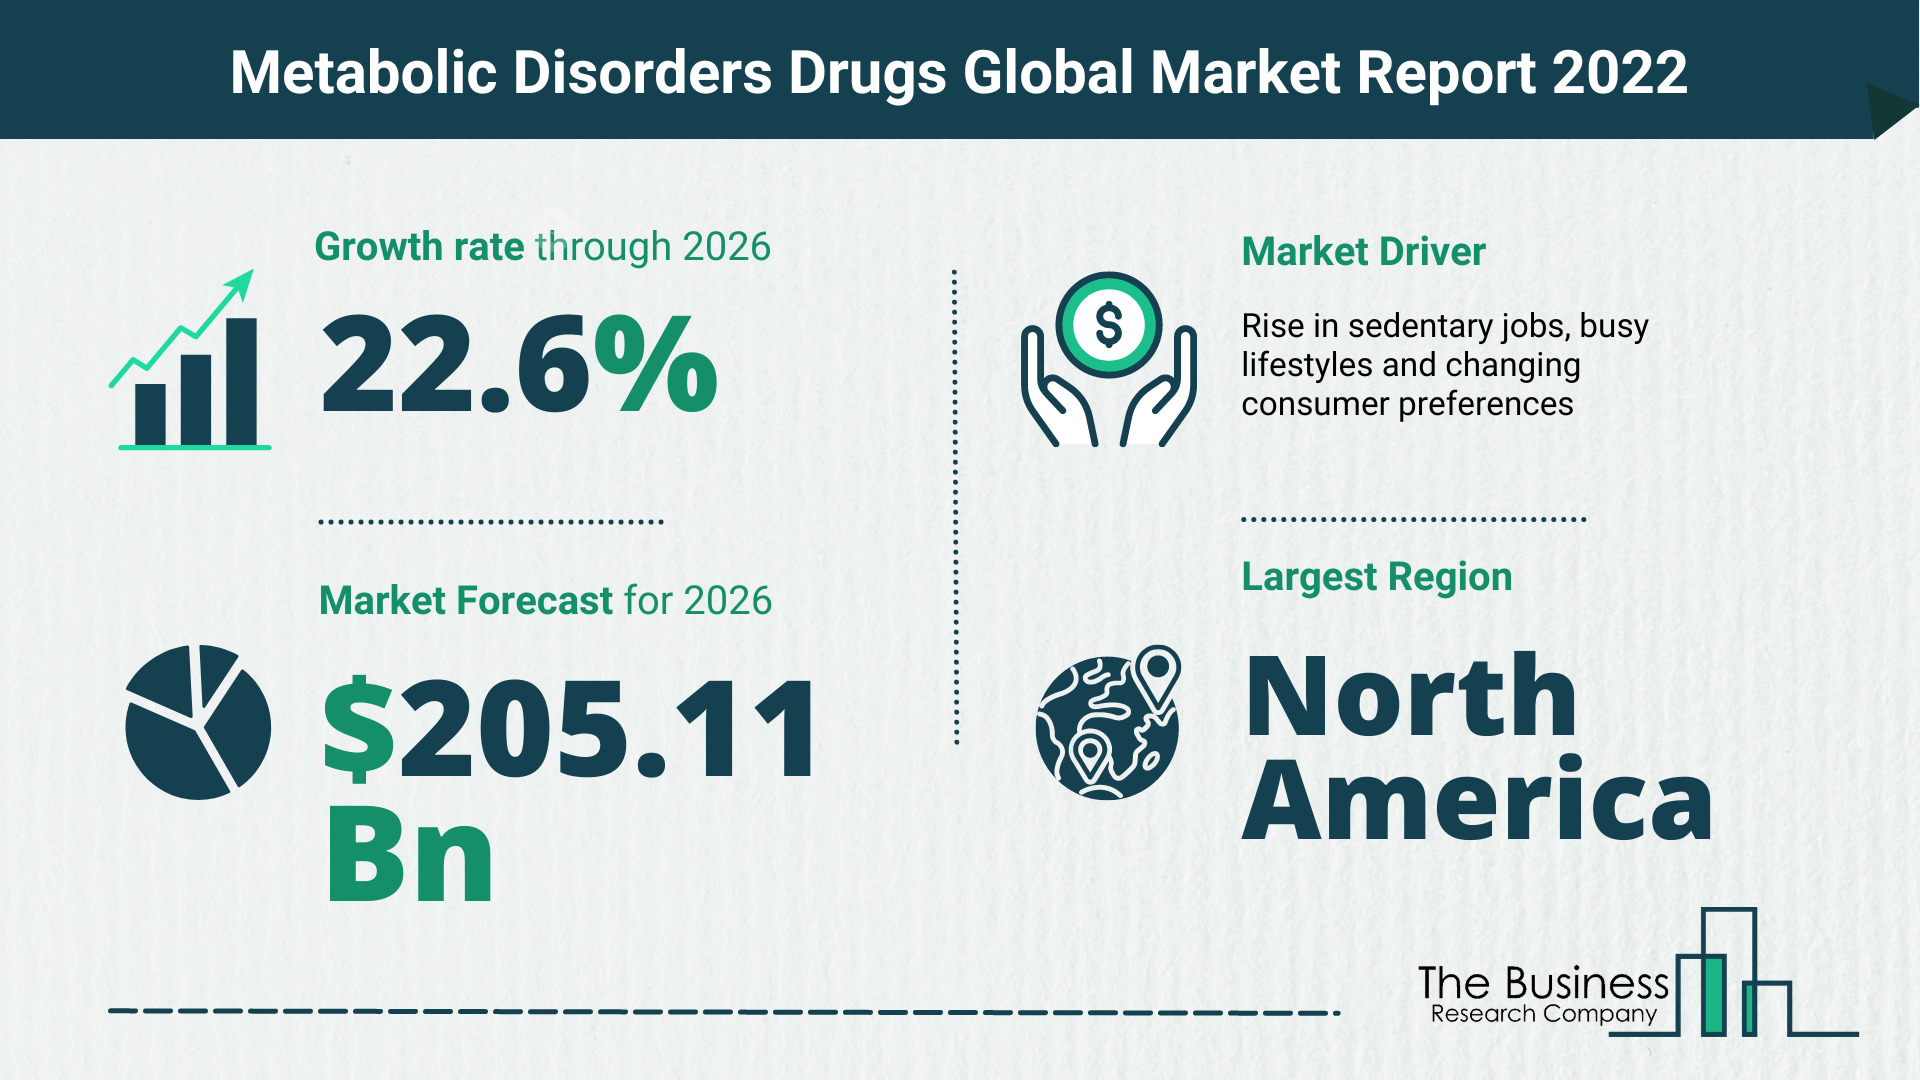 What Is The Metabolic Disorders Drugs Market Overview In 2022?